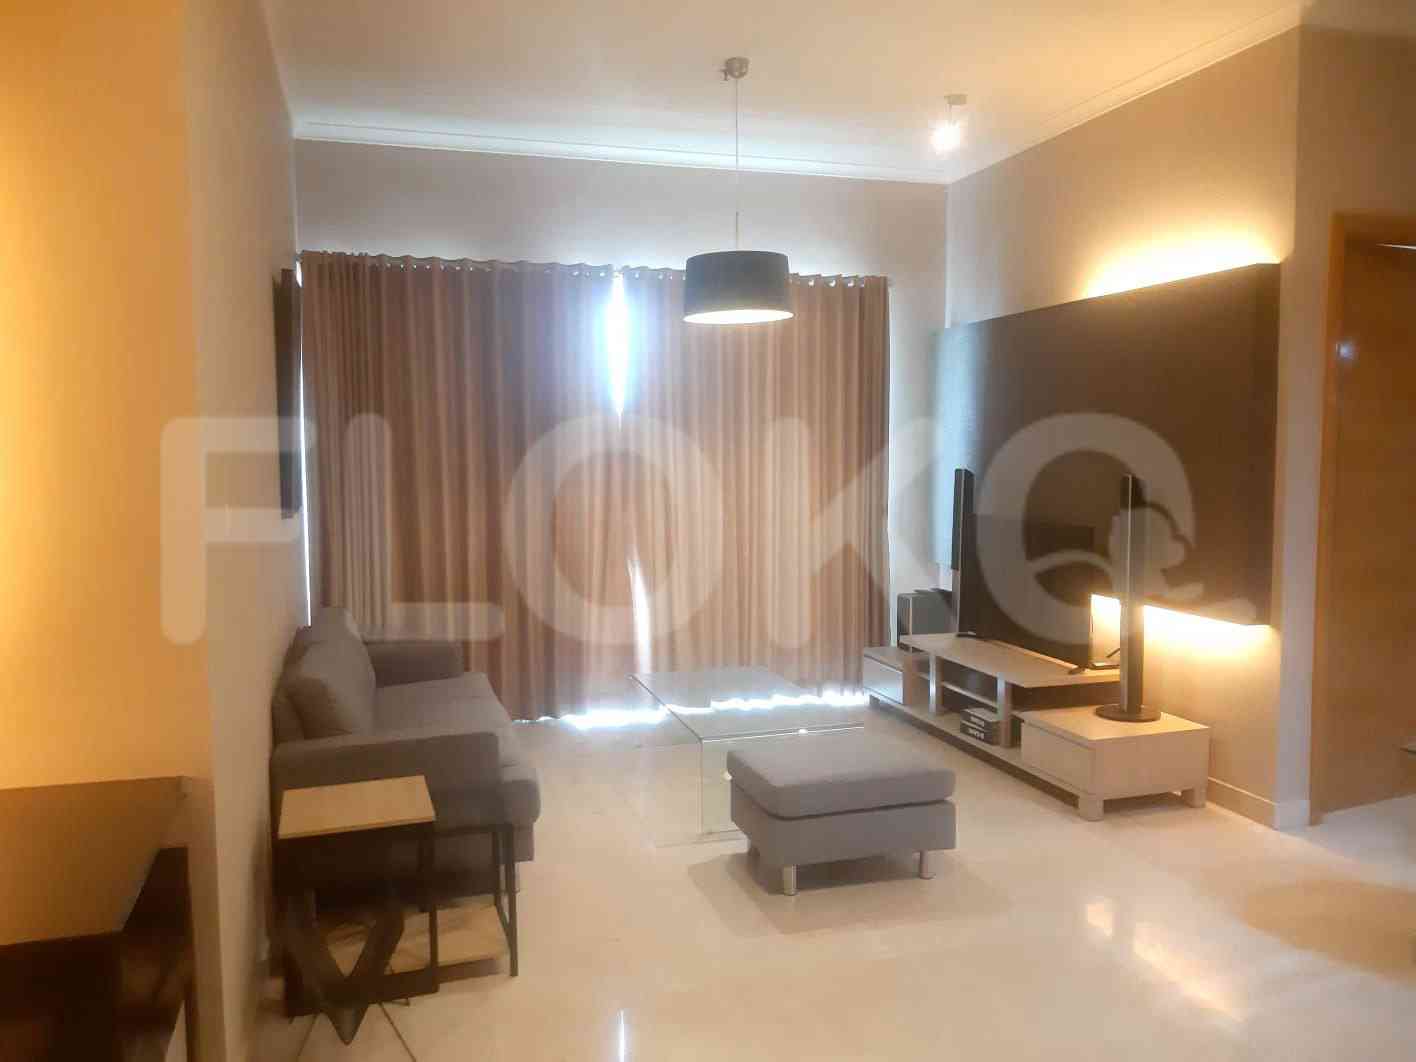 3 Bedroom on 15th Floor for Rent in Senayan Residence - fse4a8 6